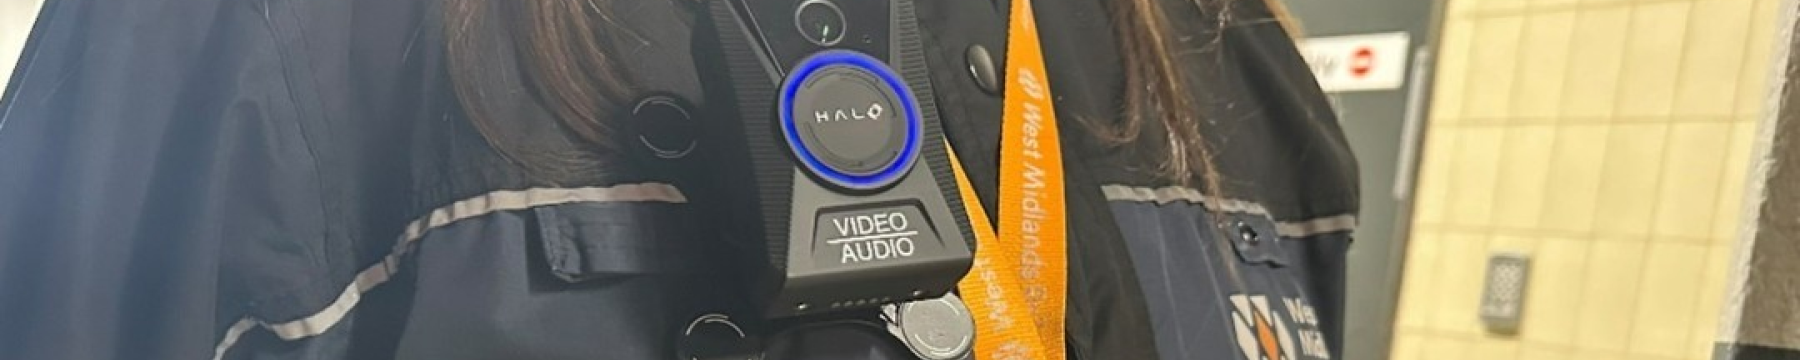 A member of WMR staff wearing a Body Worm Camera on a black jacket. The WMR logo is displayed on the jacket and an orange lanyard is worn. 